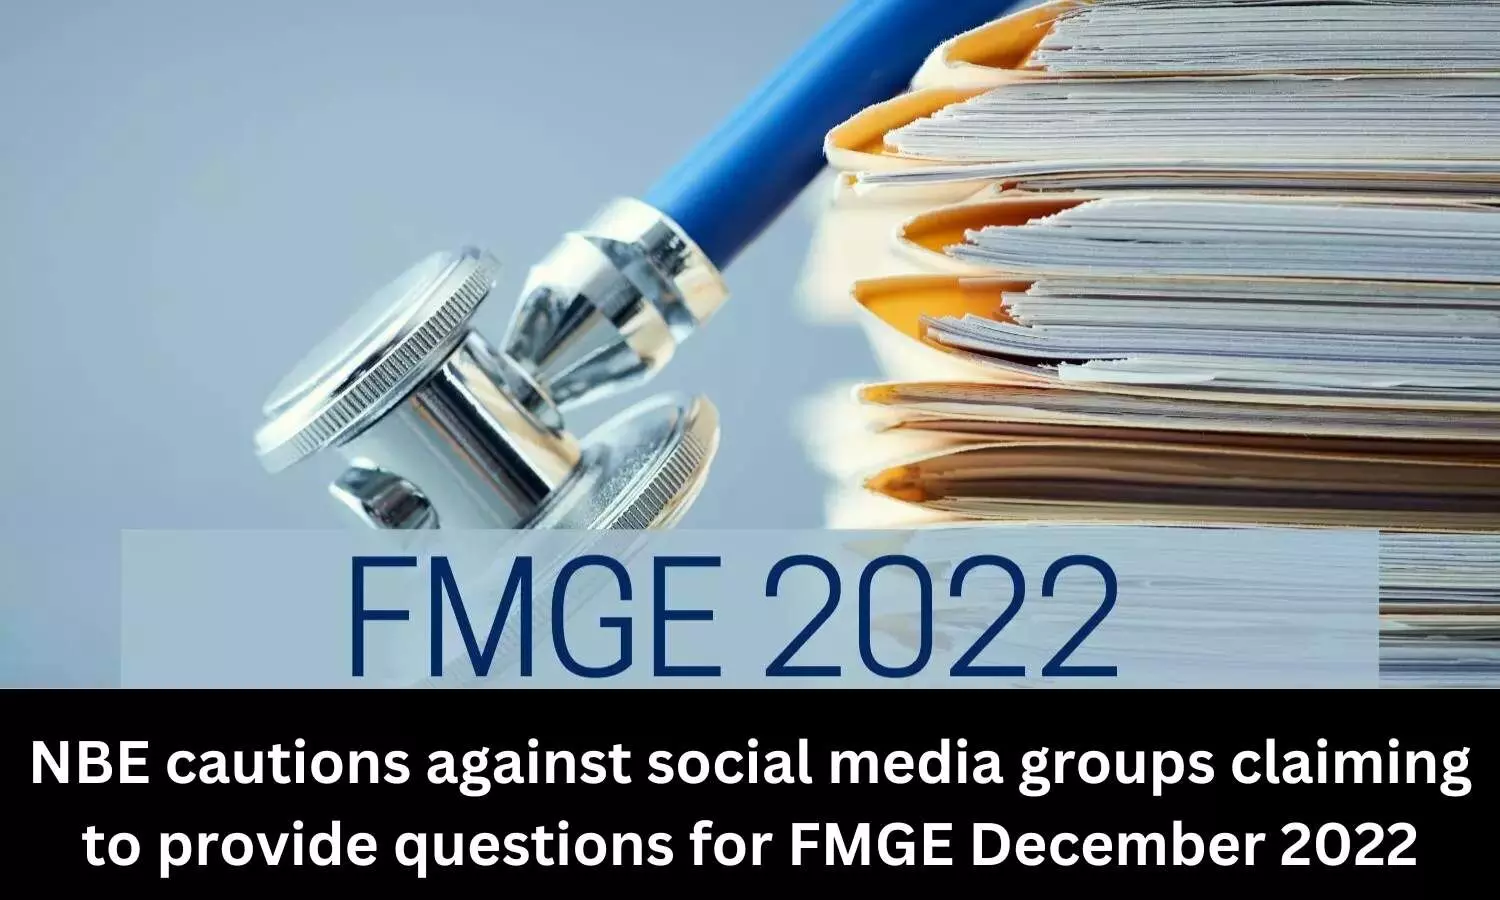 NBE cautions against social media groups claiming to provide questions for FMGE December 2022